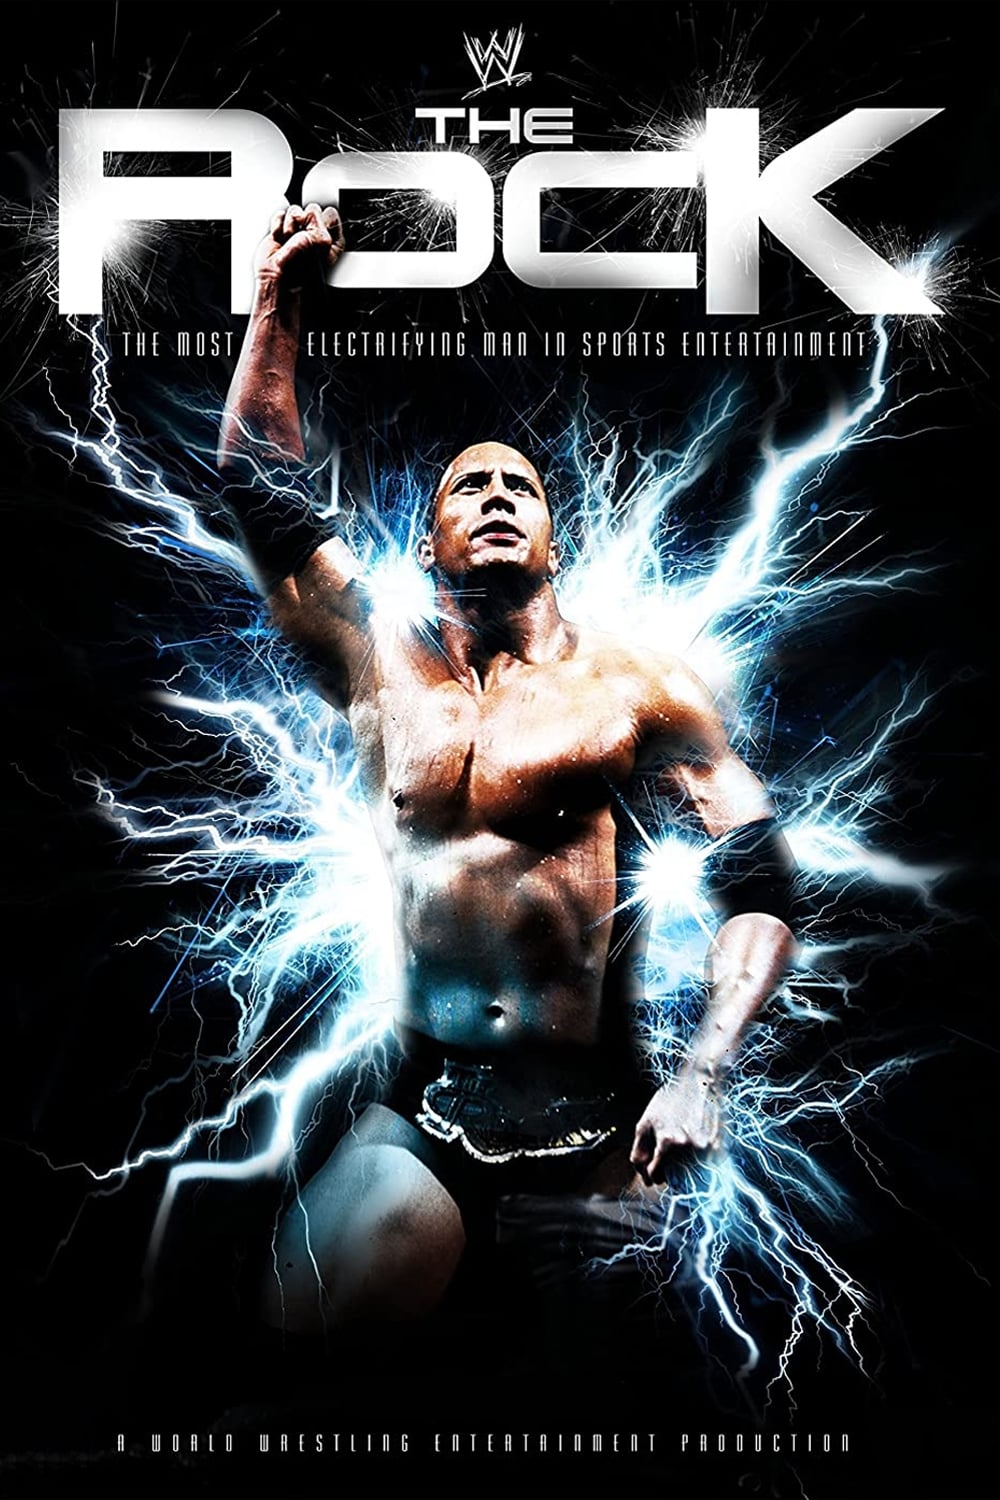 WWE: The Rock: The Most Electrifying Man in Sports Entertainment Vol. 1